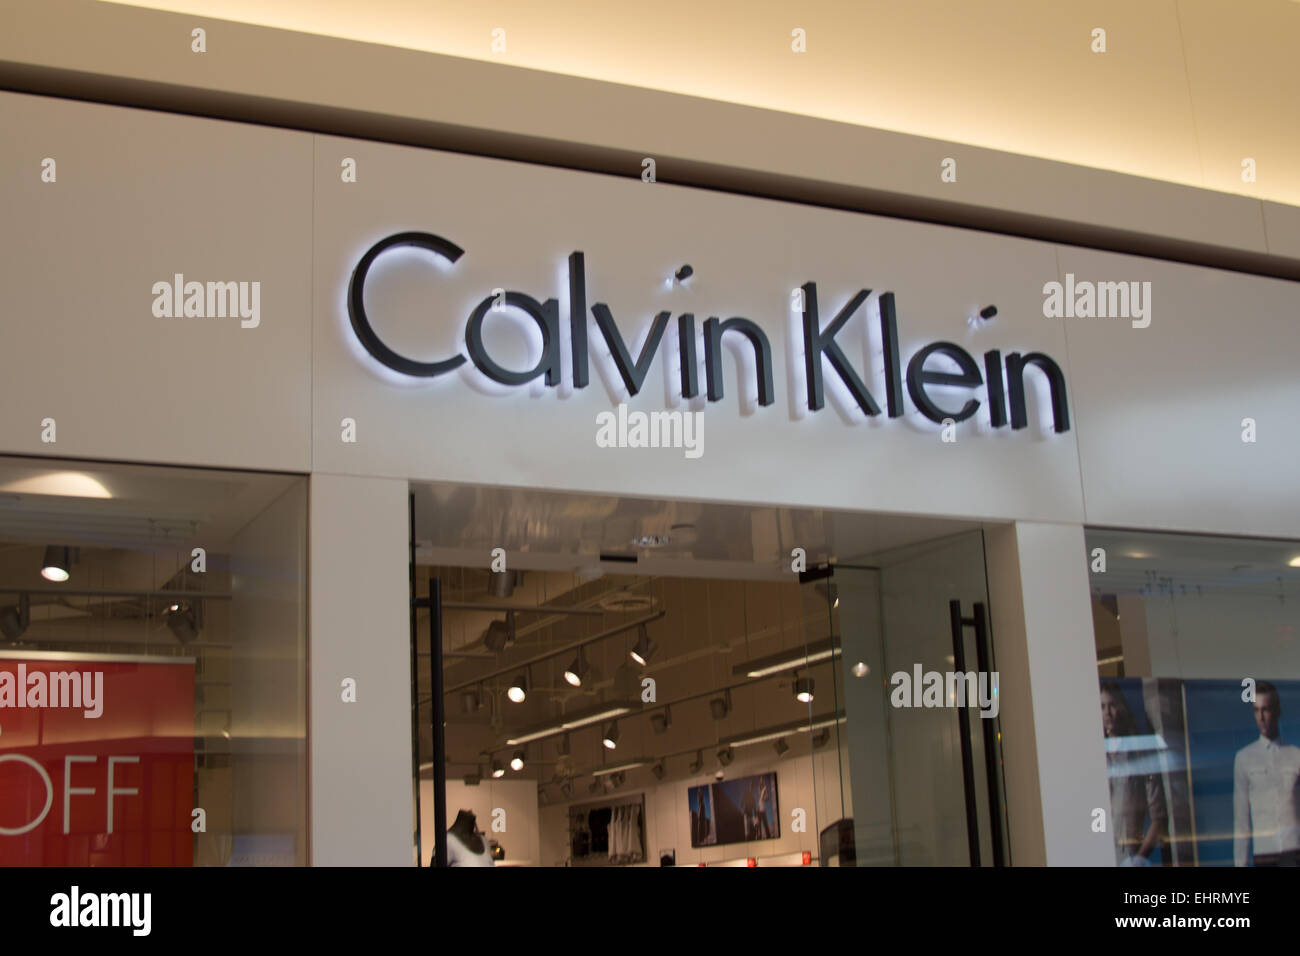 calvin klein factory outlet Cheaper Than Retail Price> Buy Clothing,  Accessories and lifestyle products for women & men -